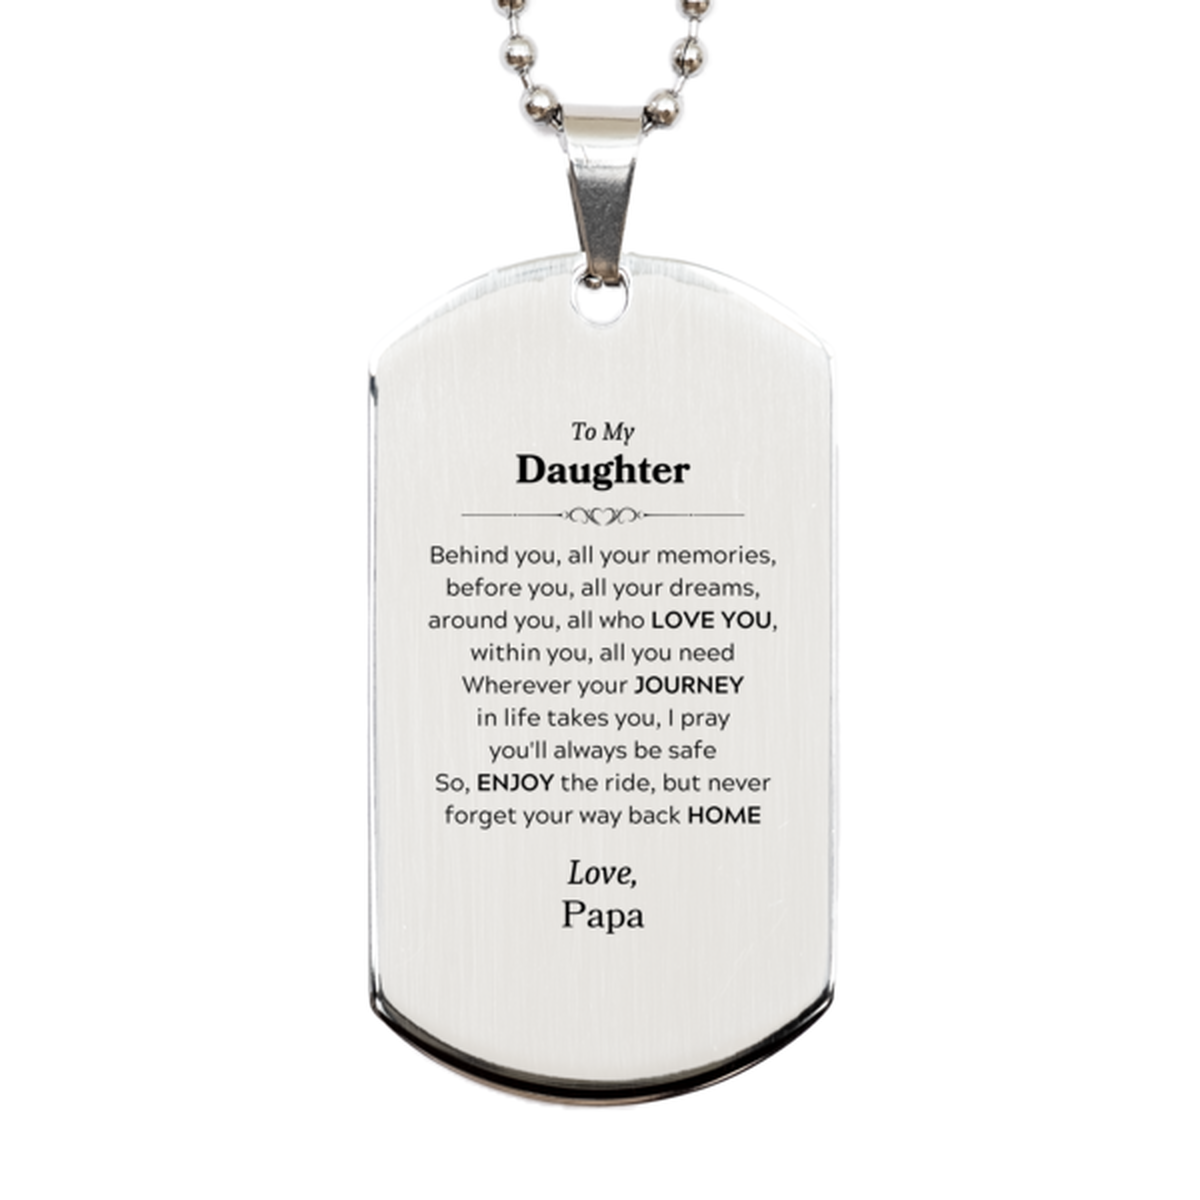 To My Daughter Graduation Gifts from Papa, Daughter Silver Dog Tag Christmas Birthday Gifts for Daughter Behind you, all your memories, before you, all your dreams. Love, Papa